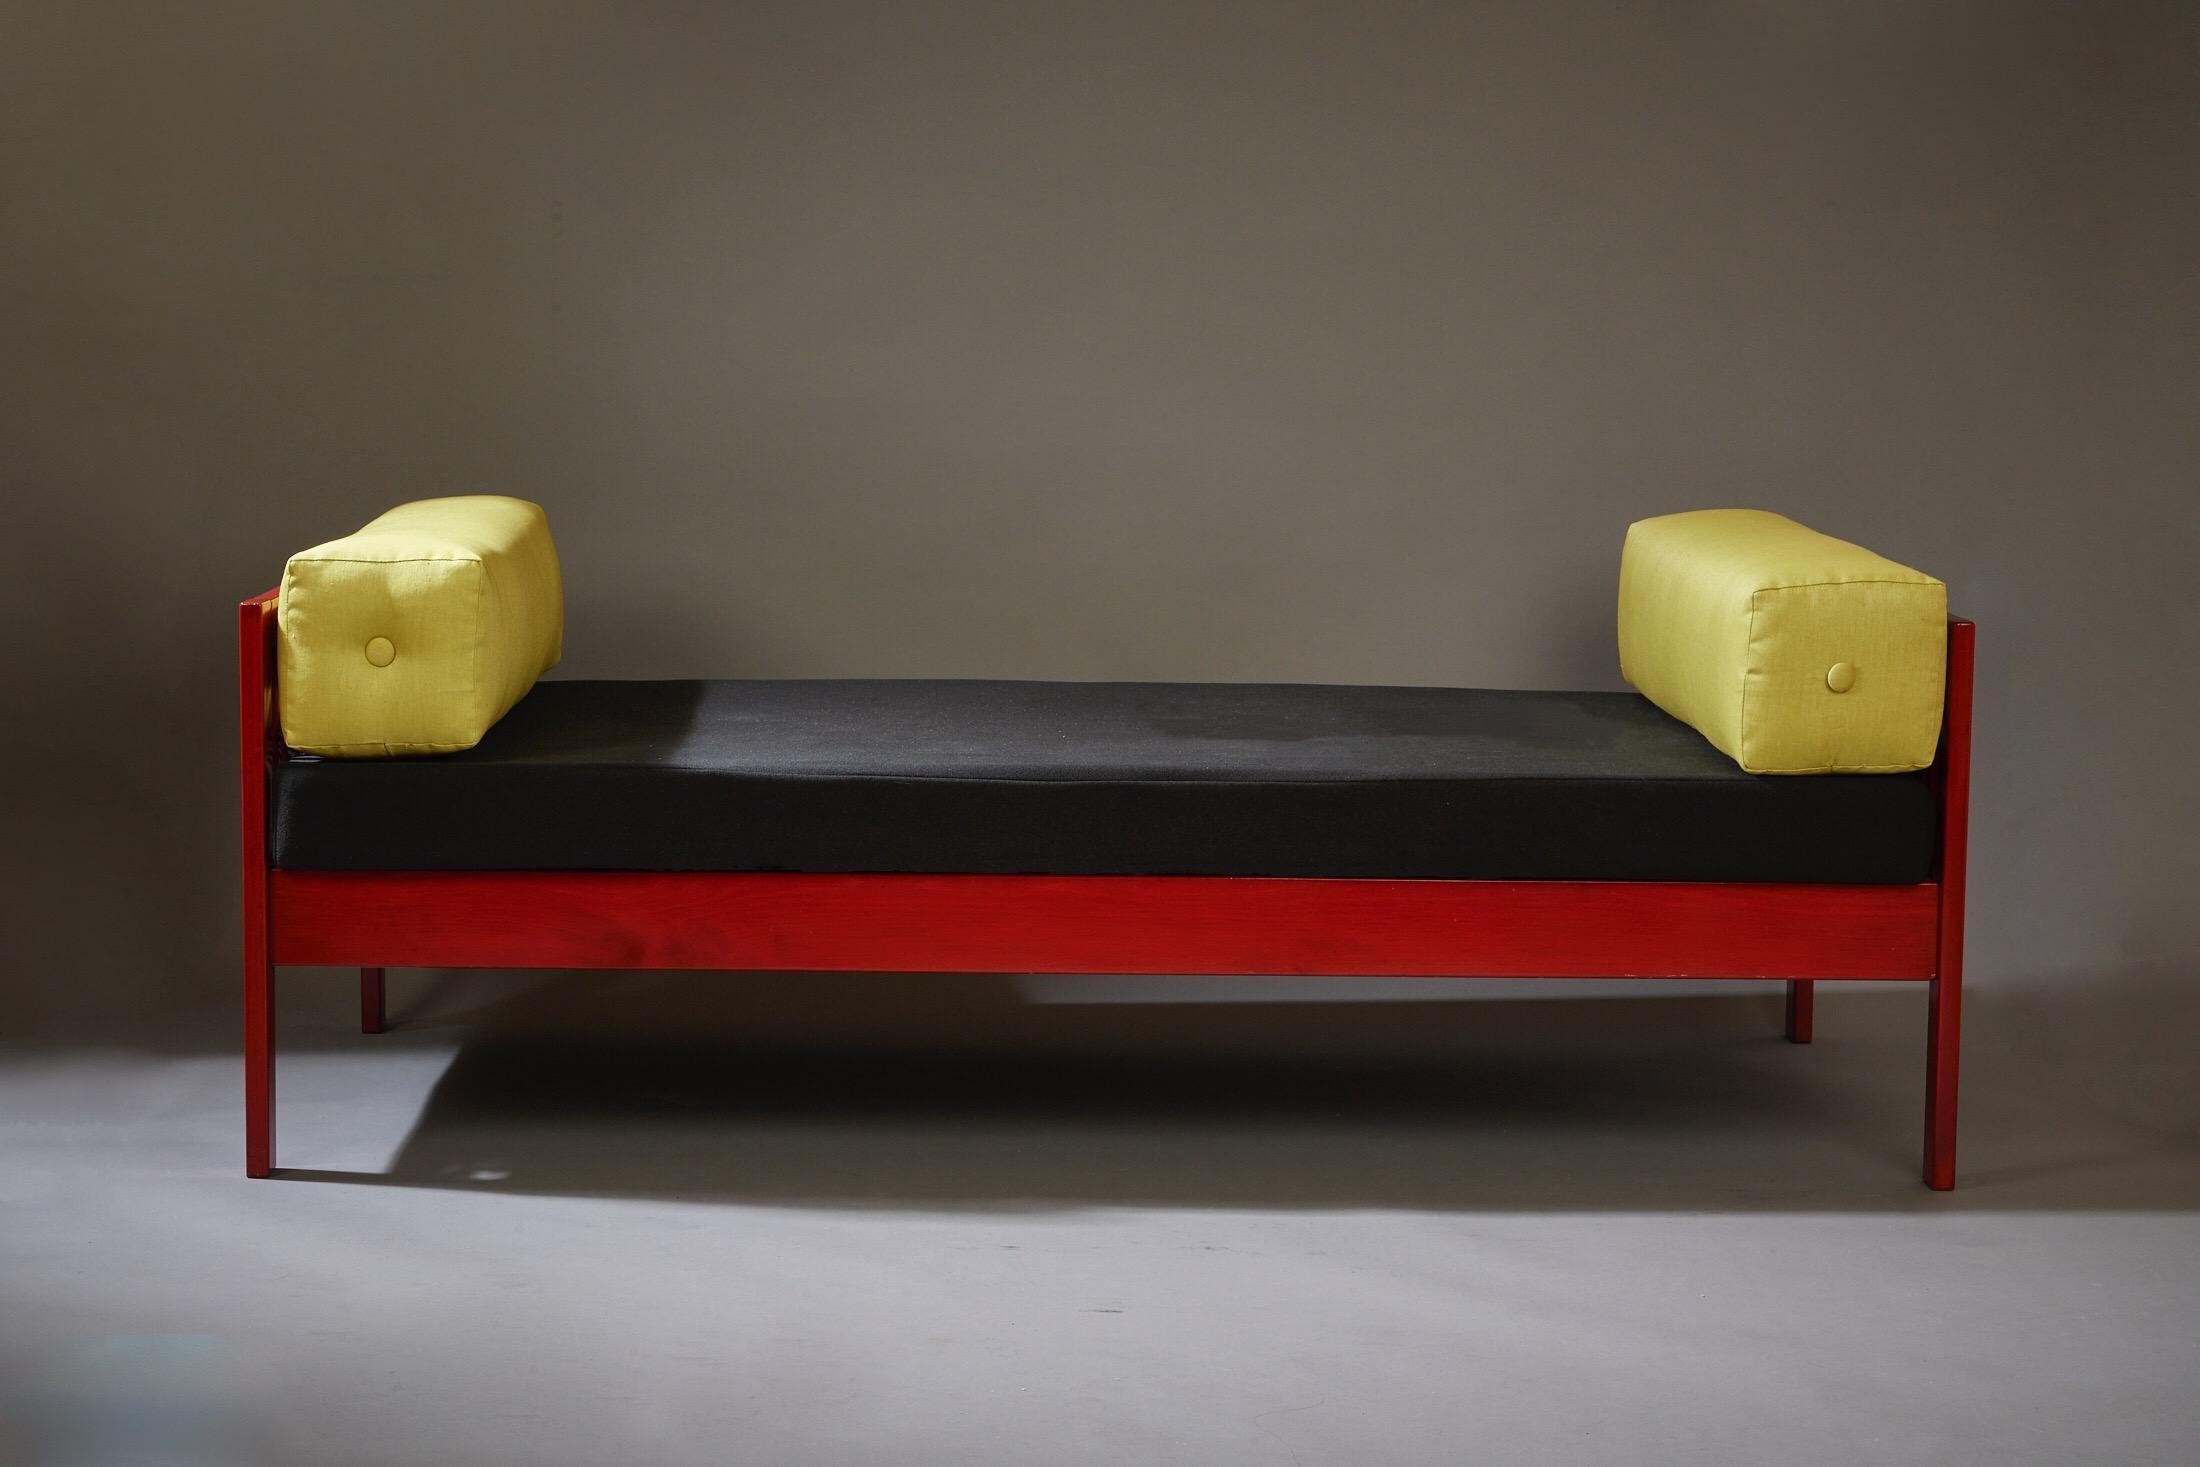 Ettore Sottsass Daybed, Red Lacquered Wood, Chartreuse Upholstery, Italy c. 1962 For Sale 1